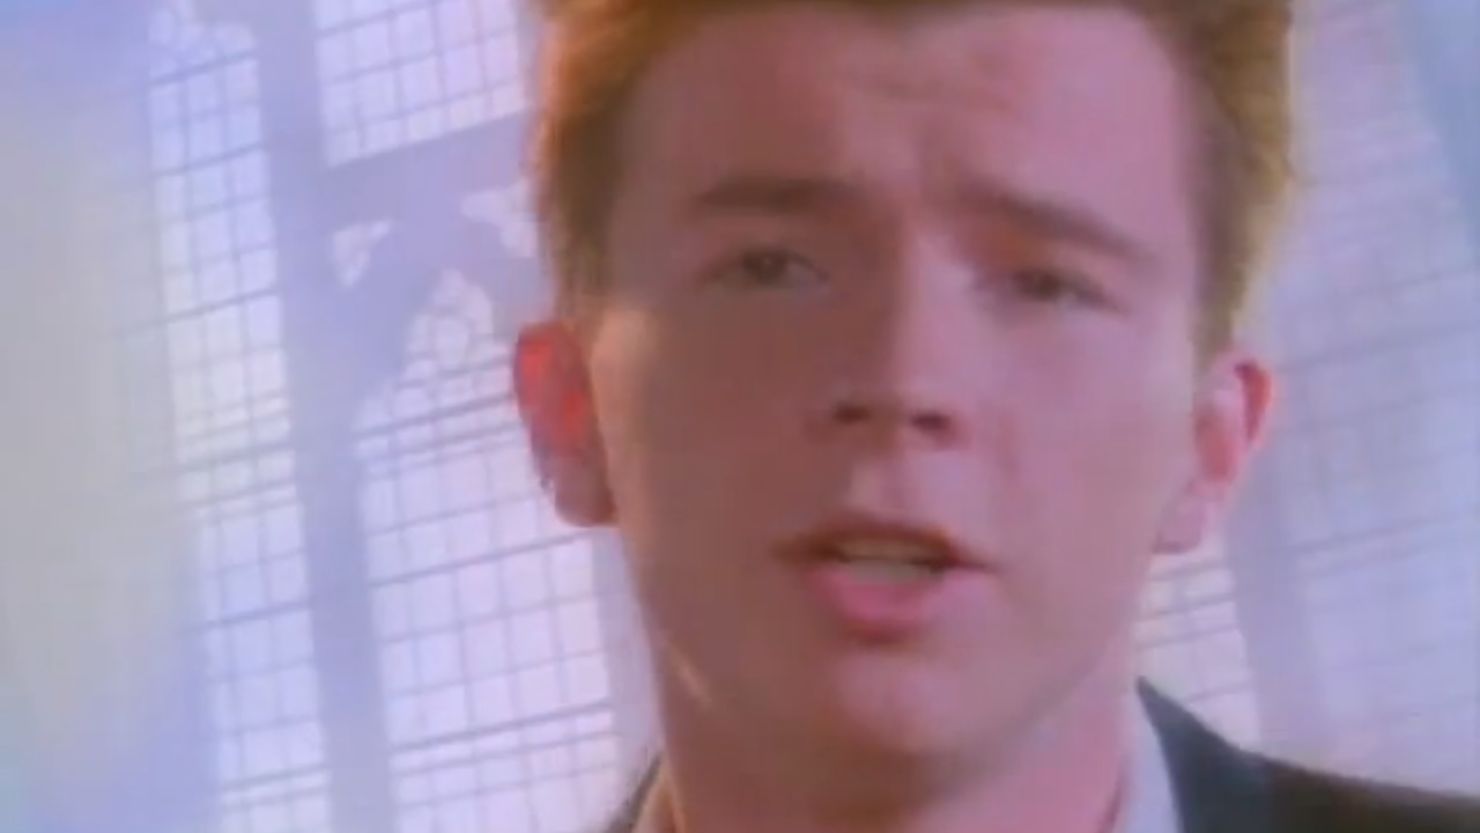 "Rickrolling" is a Web prank in which provocative-sounding links lead to an '80s music video by Rick Astley.